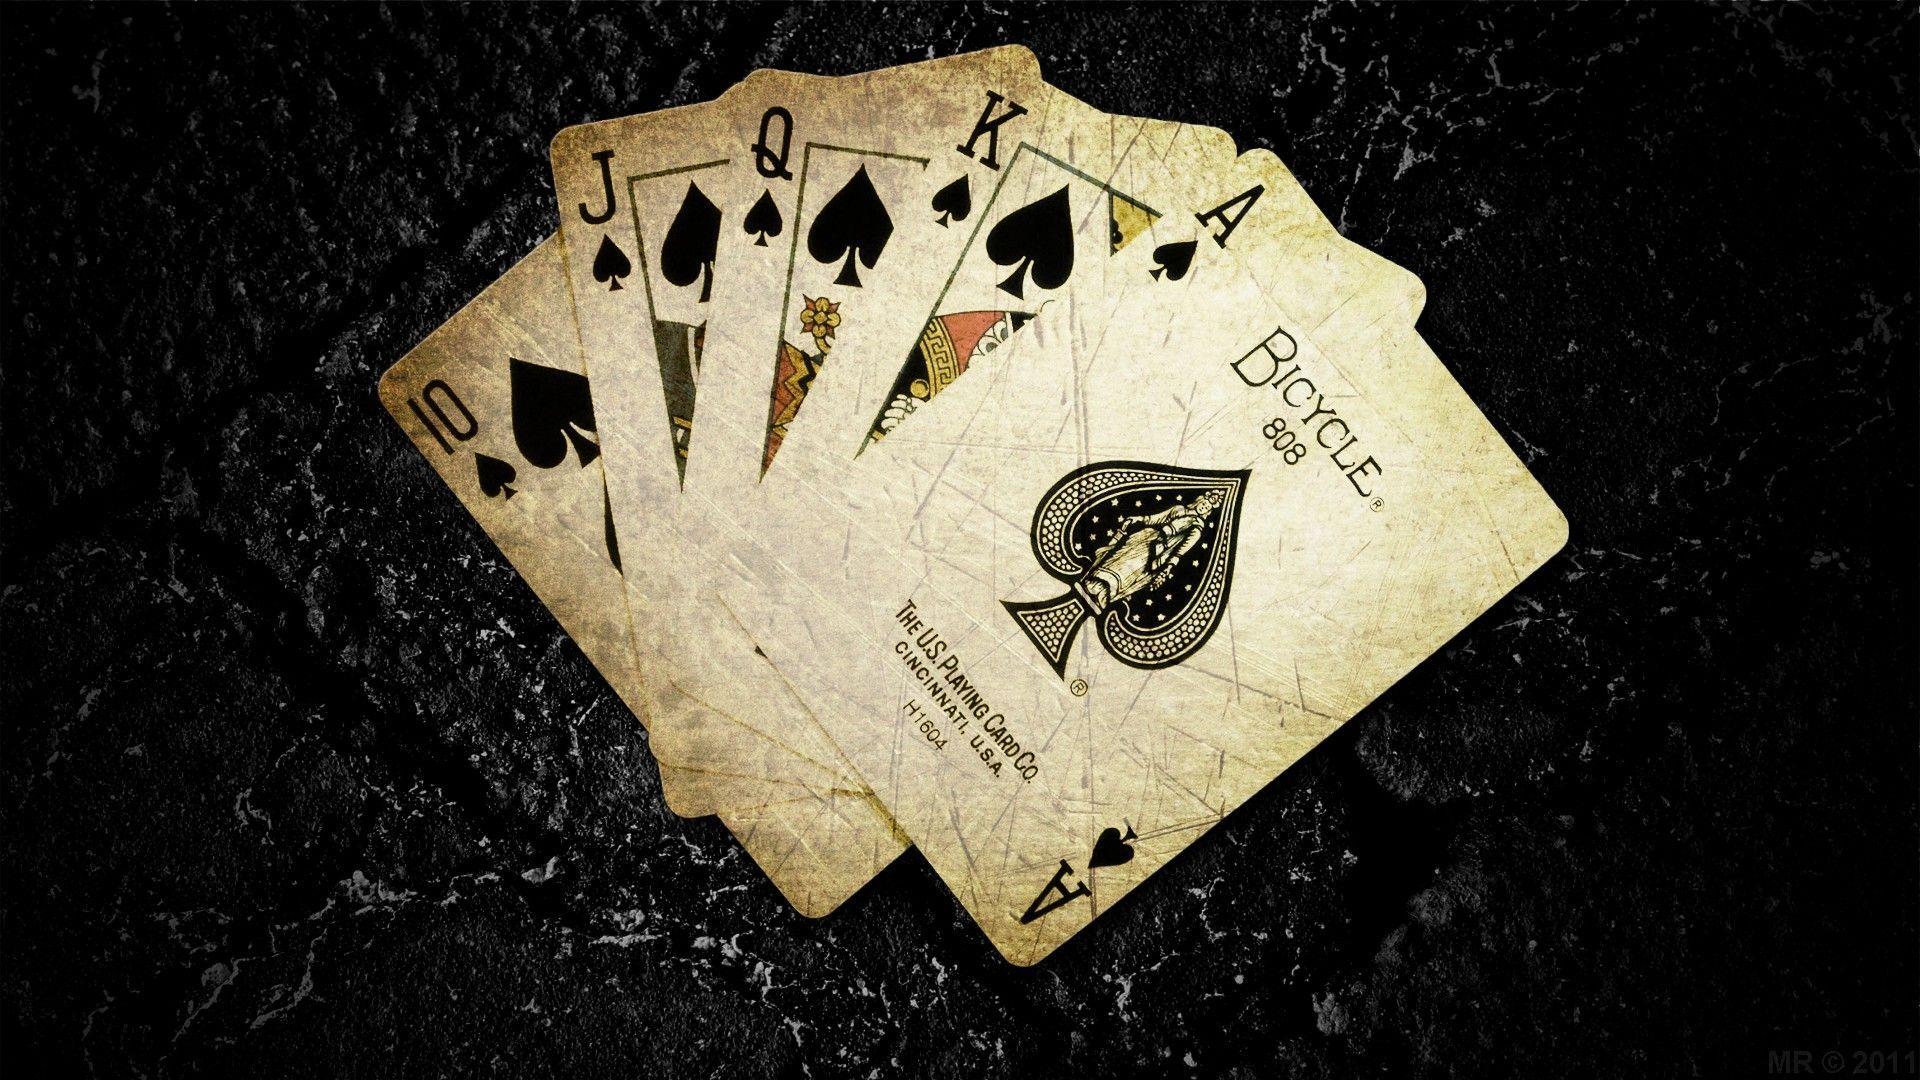 Playing Cards Wallpapers Top Free Playing Cards Backgrounds Images, Photos, Reviews